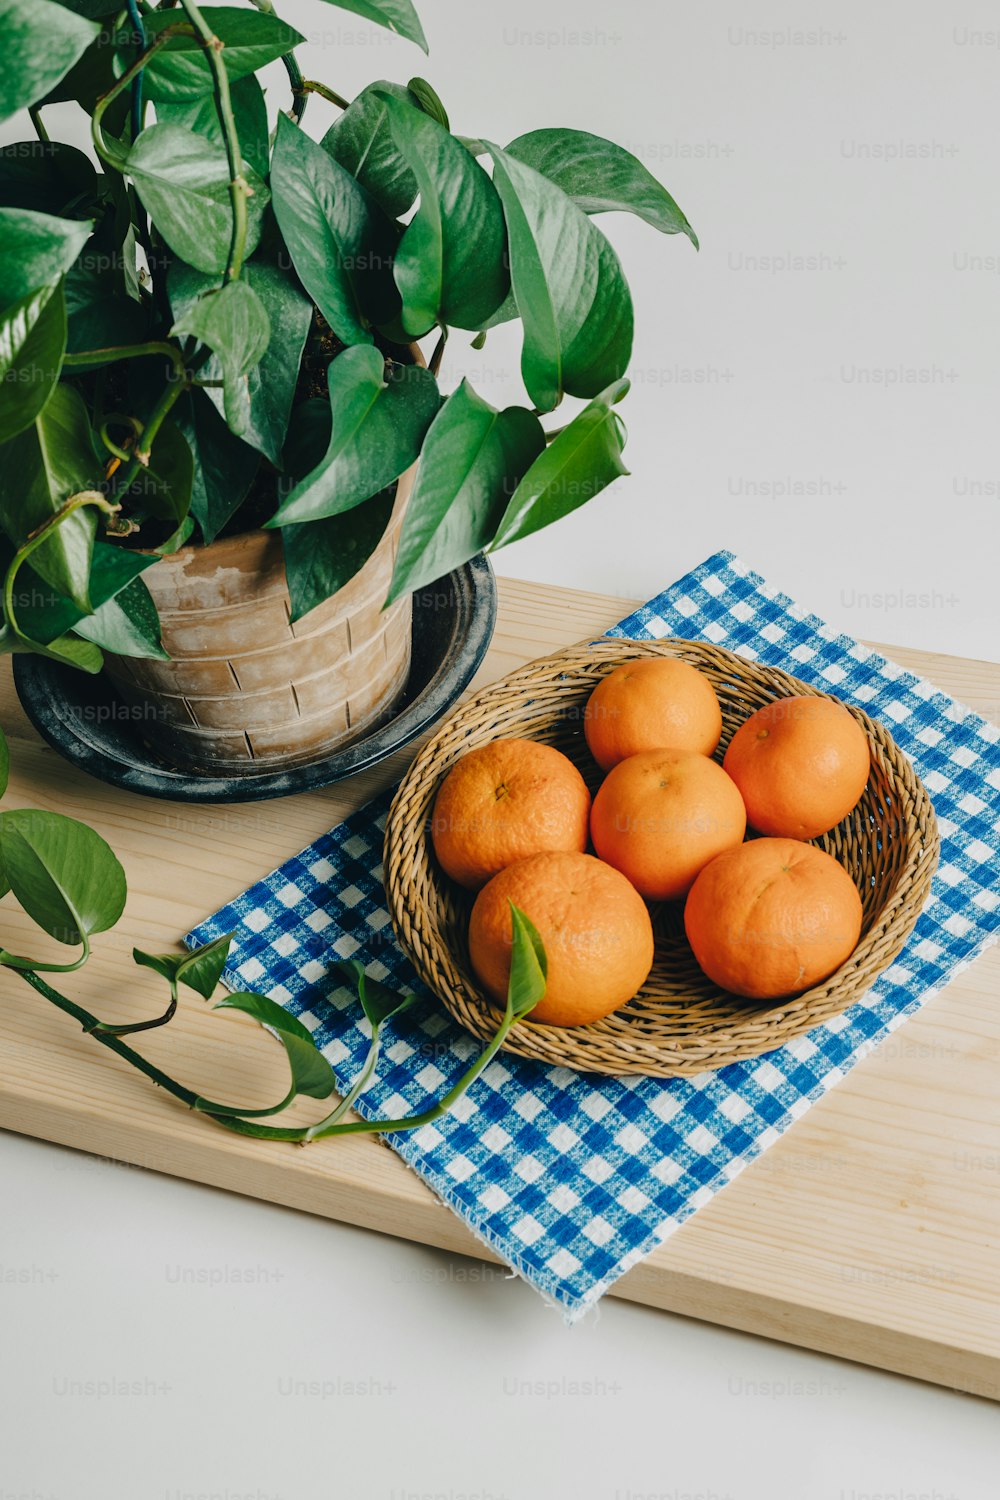 a basket of oranges sitting on a table next to a potted plant